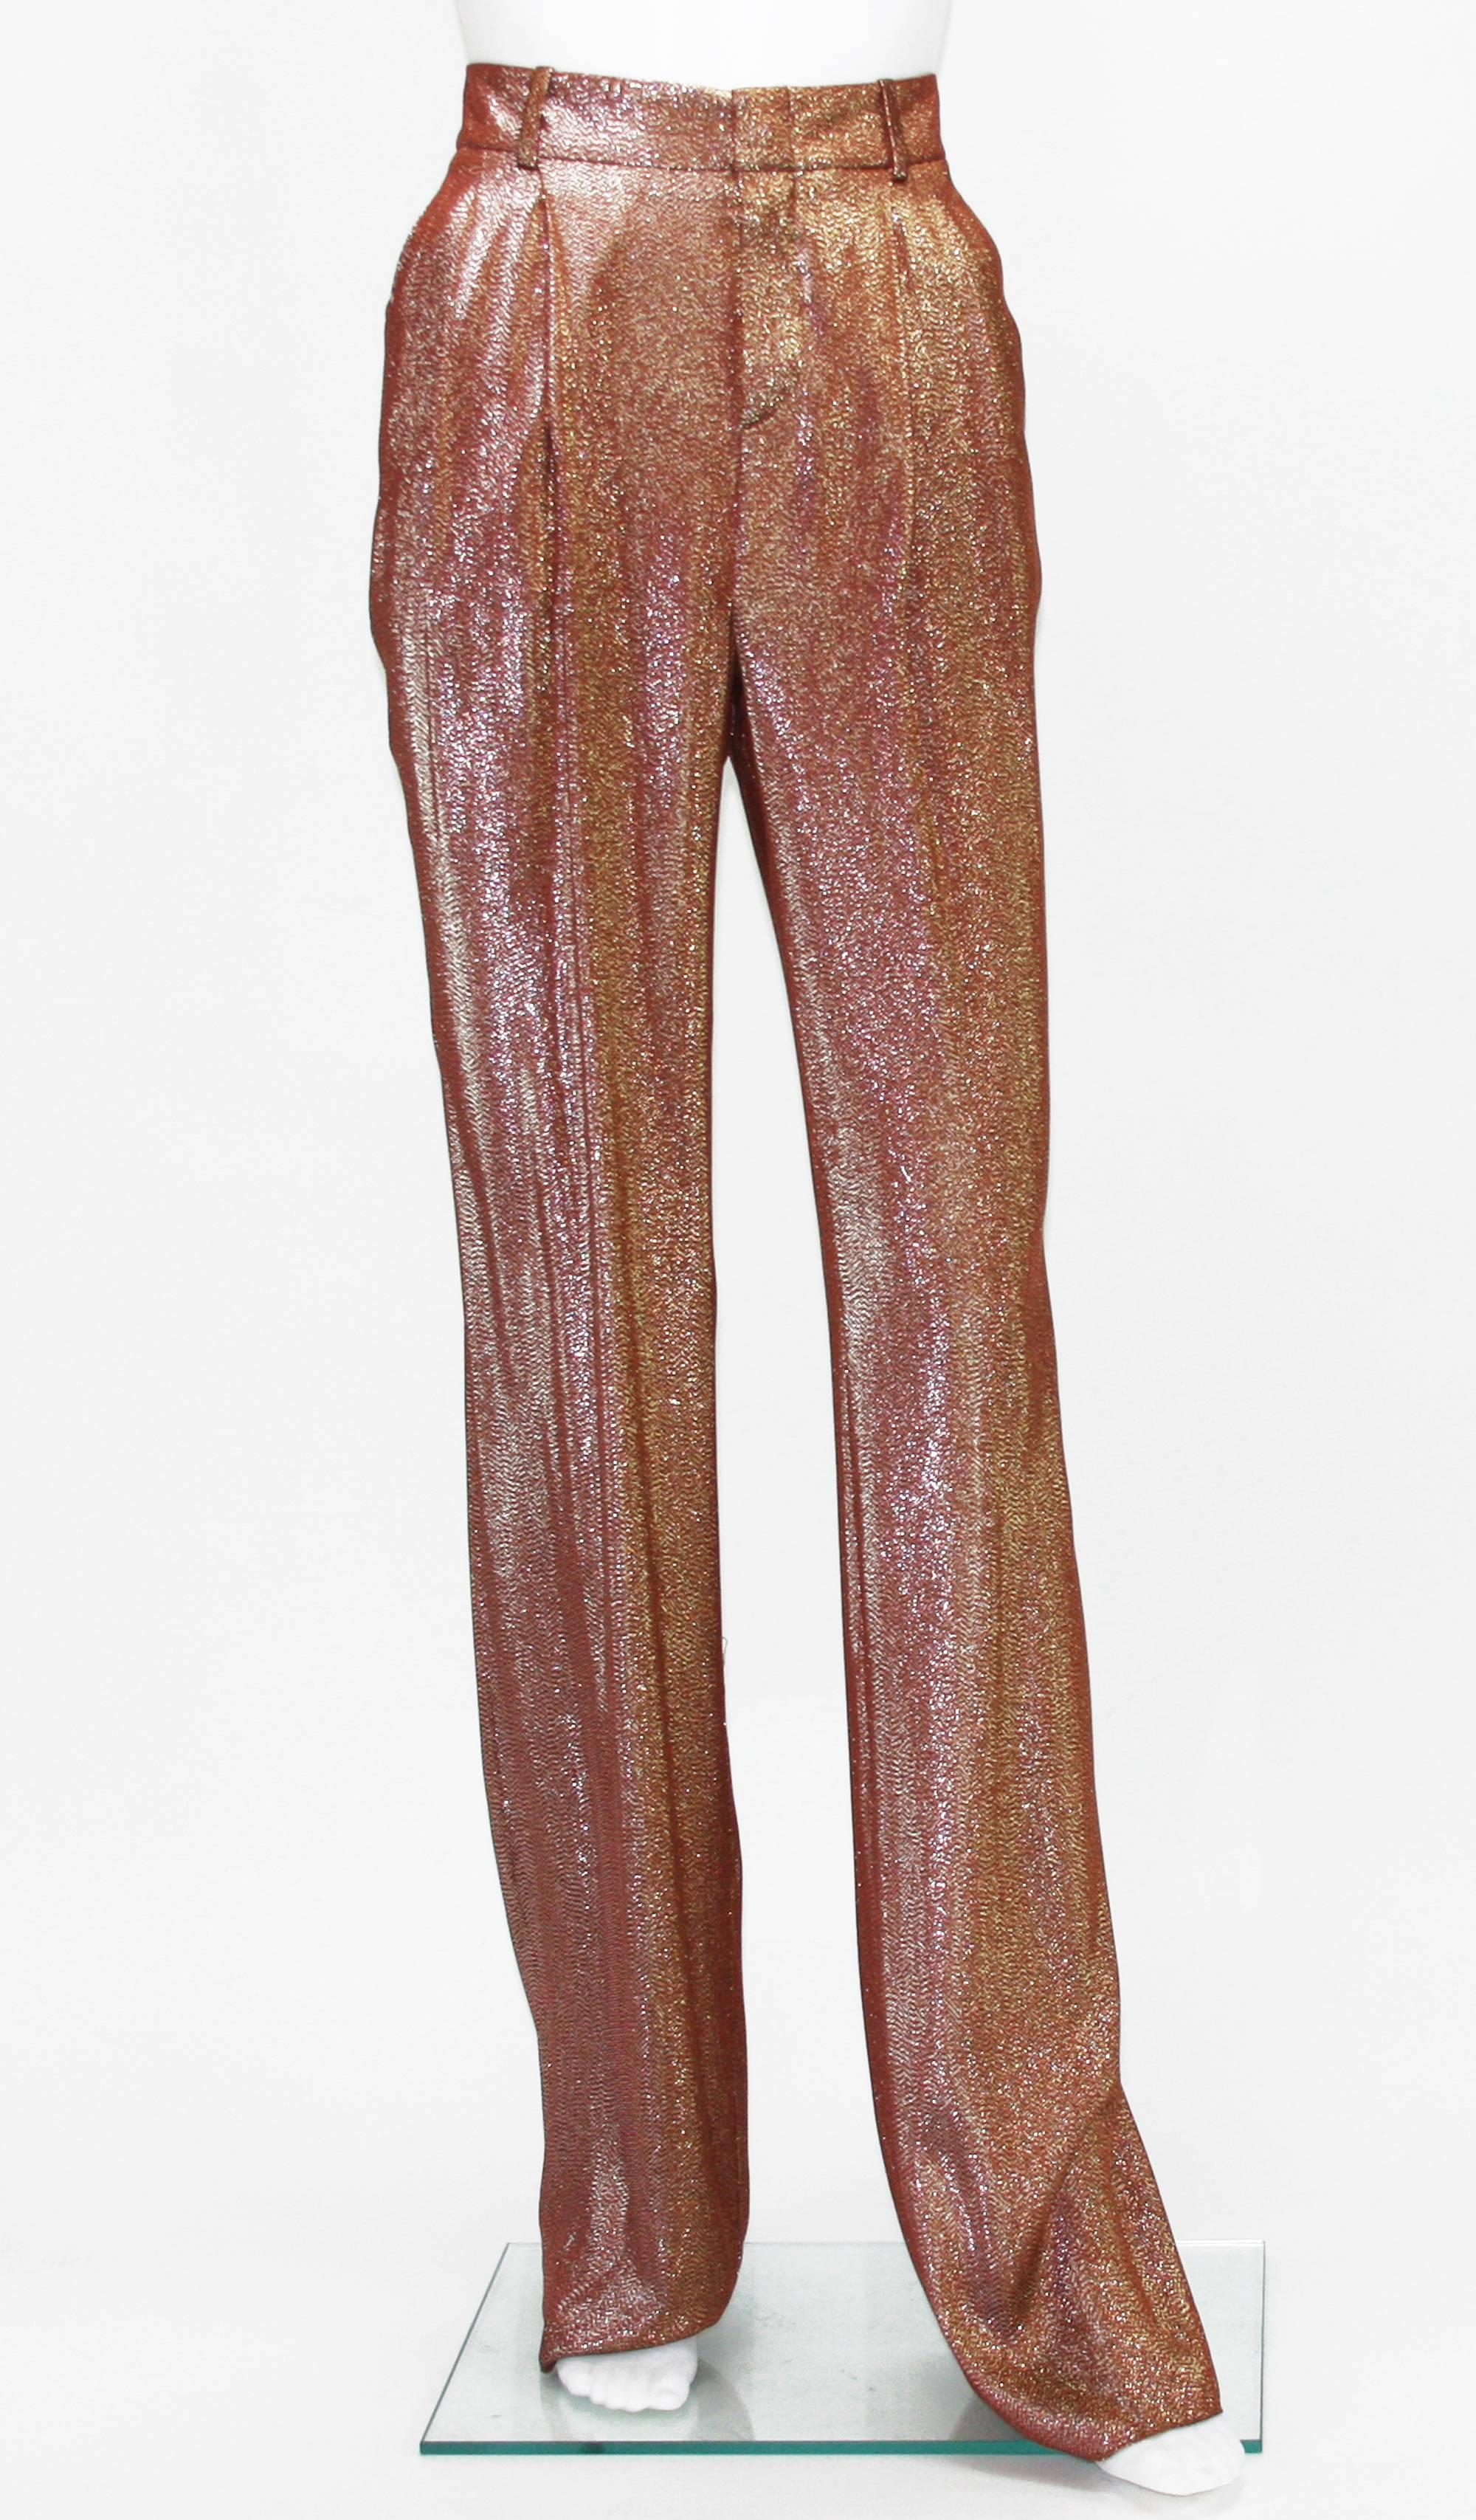 New Runway GUCCI Suit Iridescent Rust Liquid Lame Jacket & Pants sizes 38 and 40 4